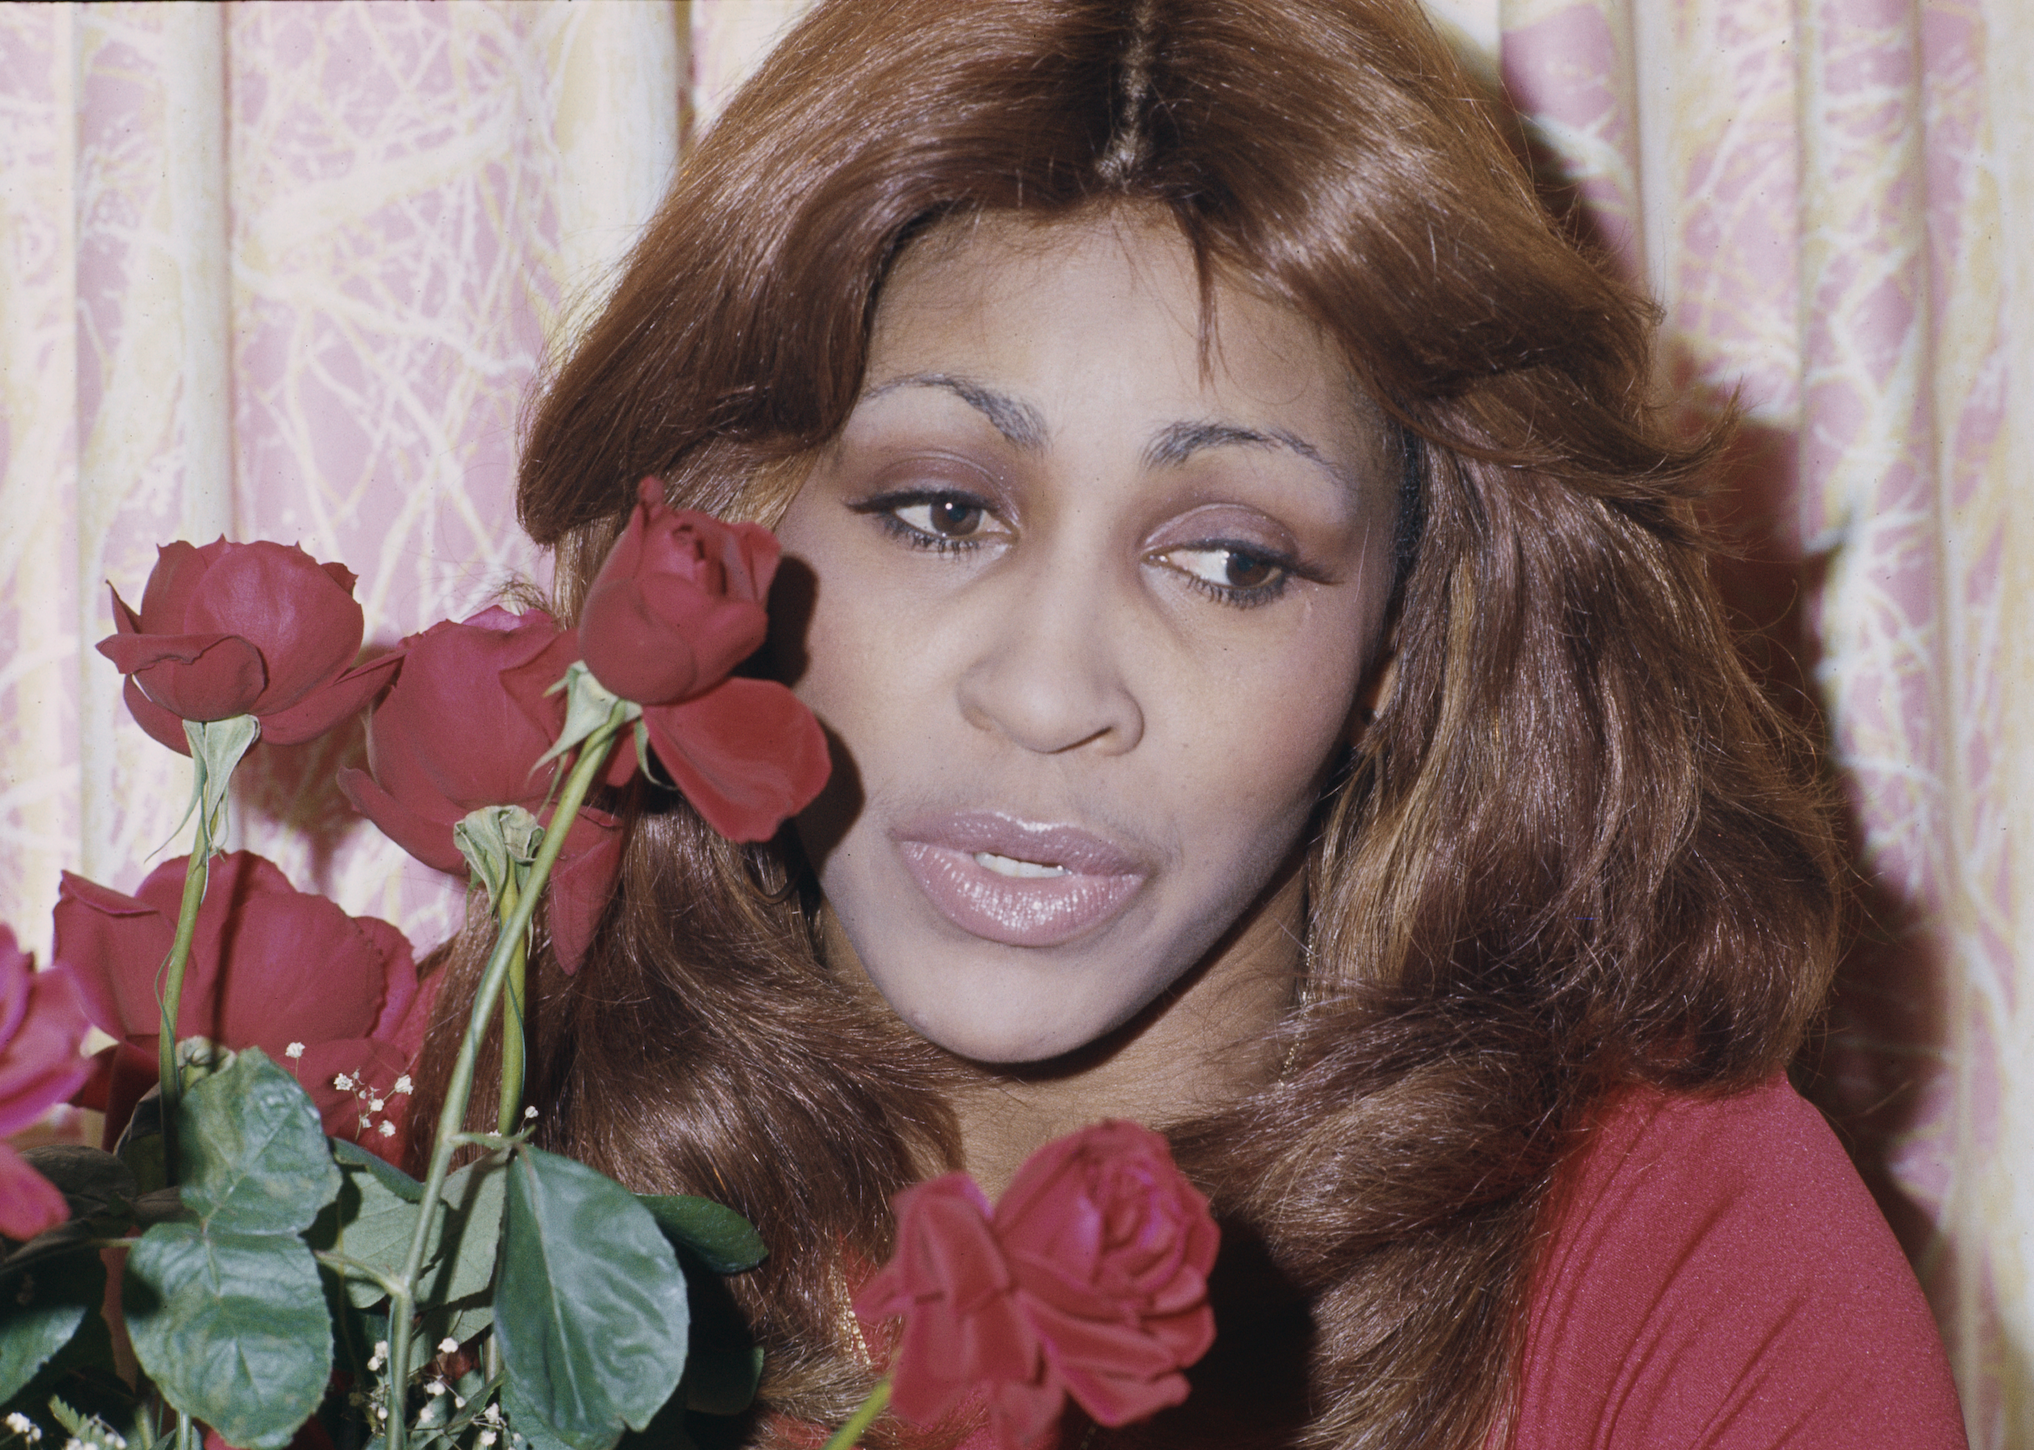 Tina Turner holding red roses.